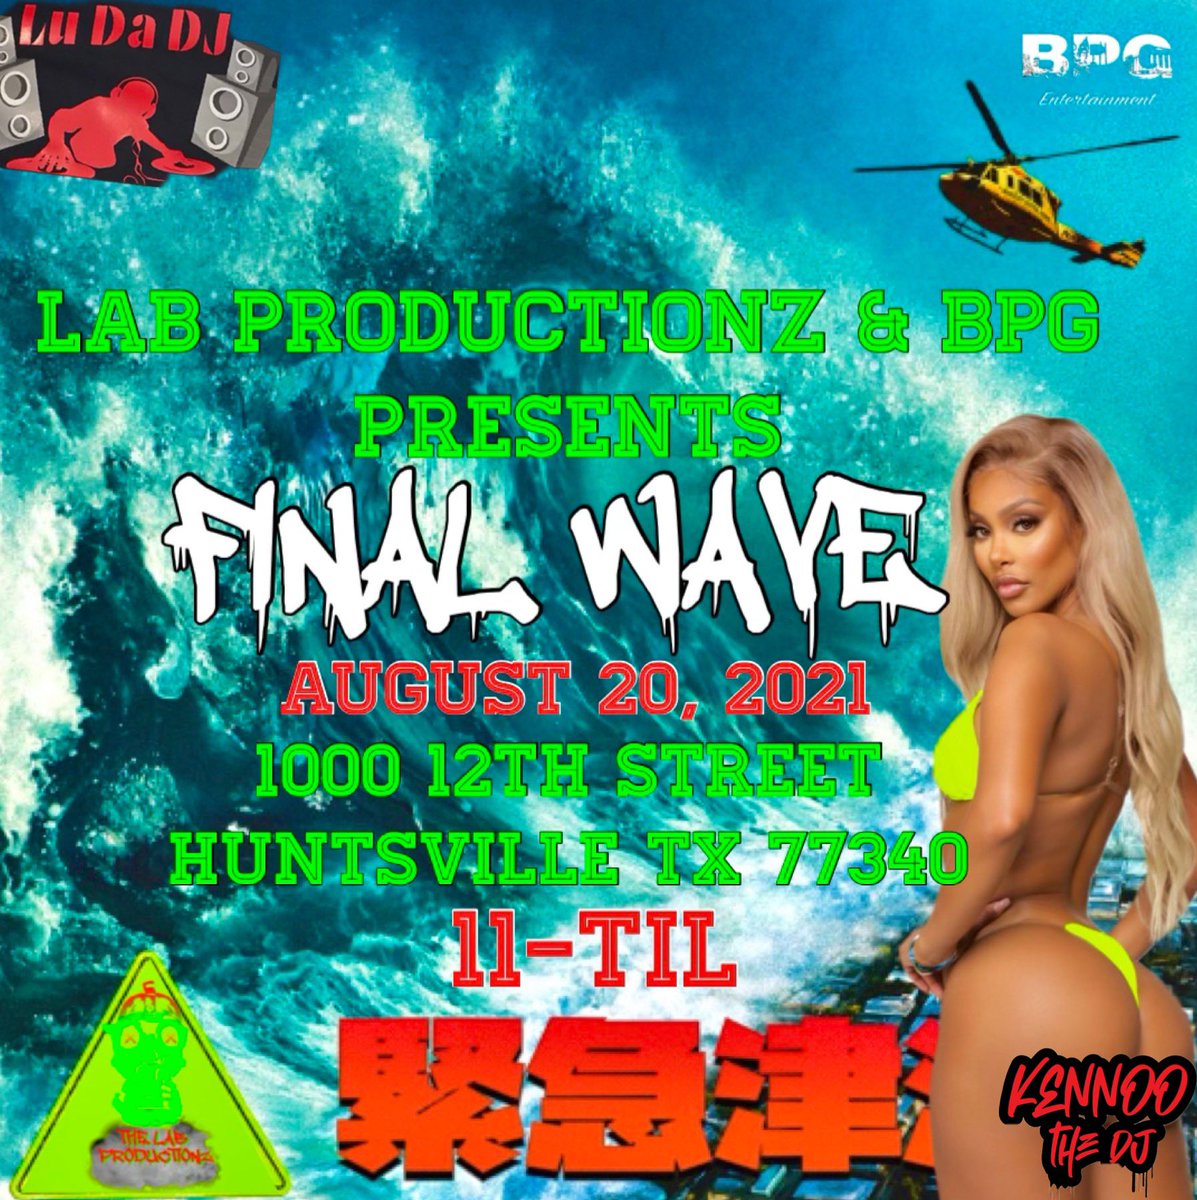 Shout out to @AspenSamHouston for allowing #LabProductionz to help move in residents and spread the word to get people to come to #FinalWave.

🌊08.20.21🌊
@labproductionz1 x @BPG_Prodigies 

#SHSUWELCOMEWEEK 
#SHSU25 #SHSU24 #SHSU23 #SHSU22